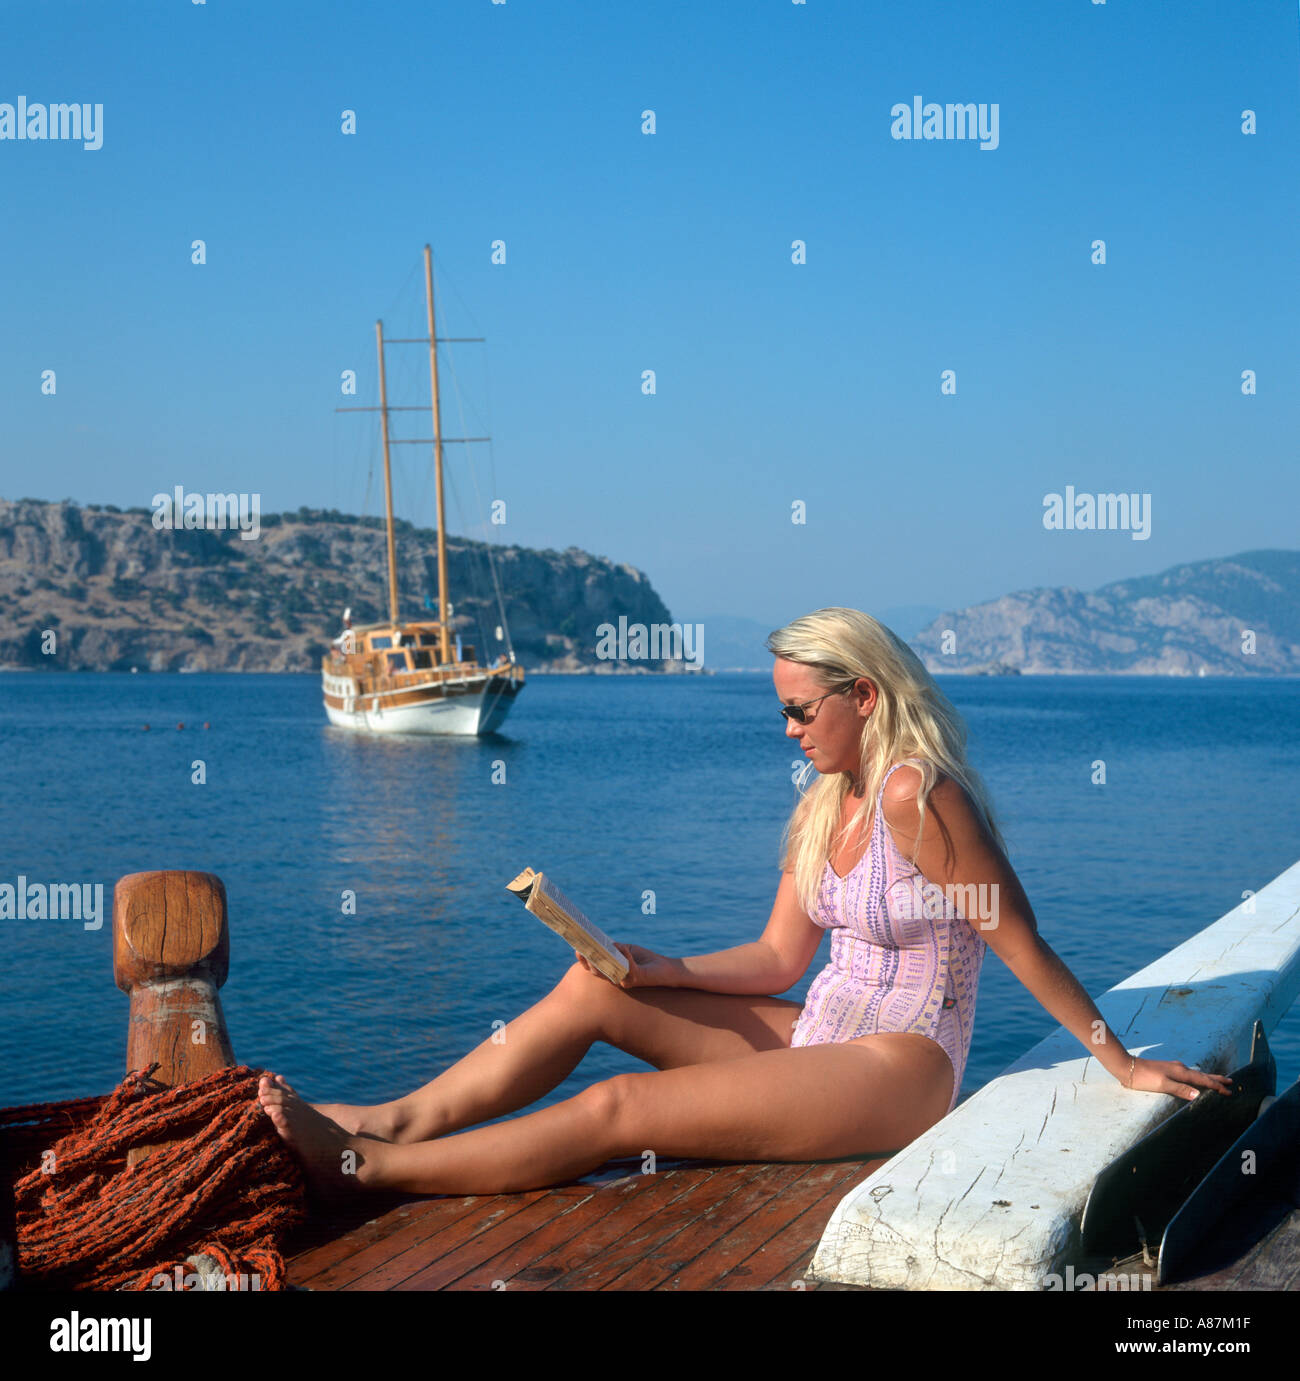 Girl on an excursion on a Gulet (local boat), Marmaris, Turkey Stock Photo